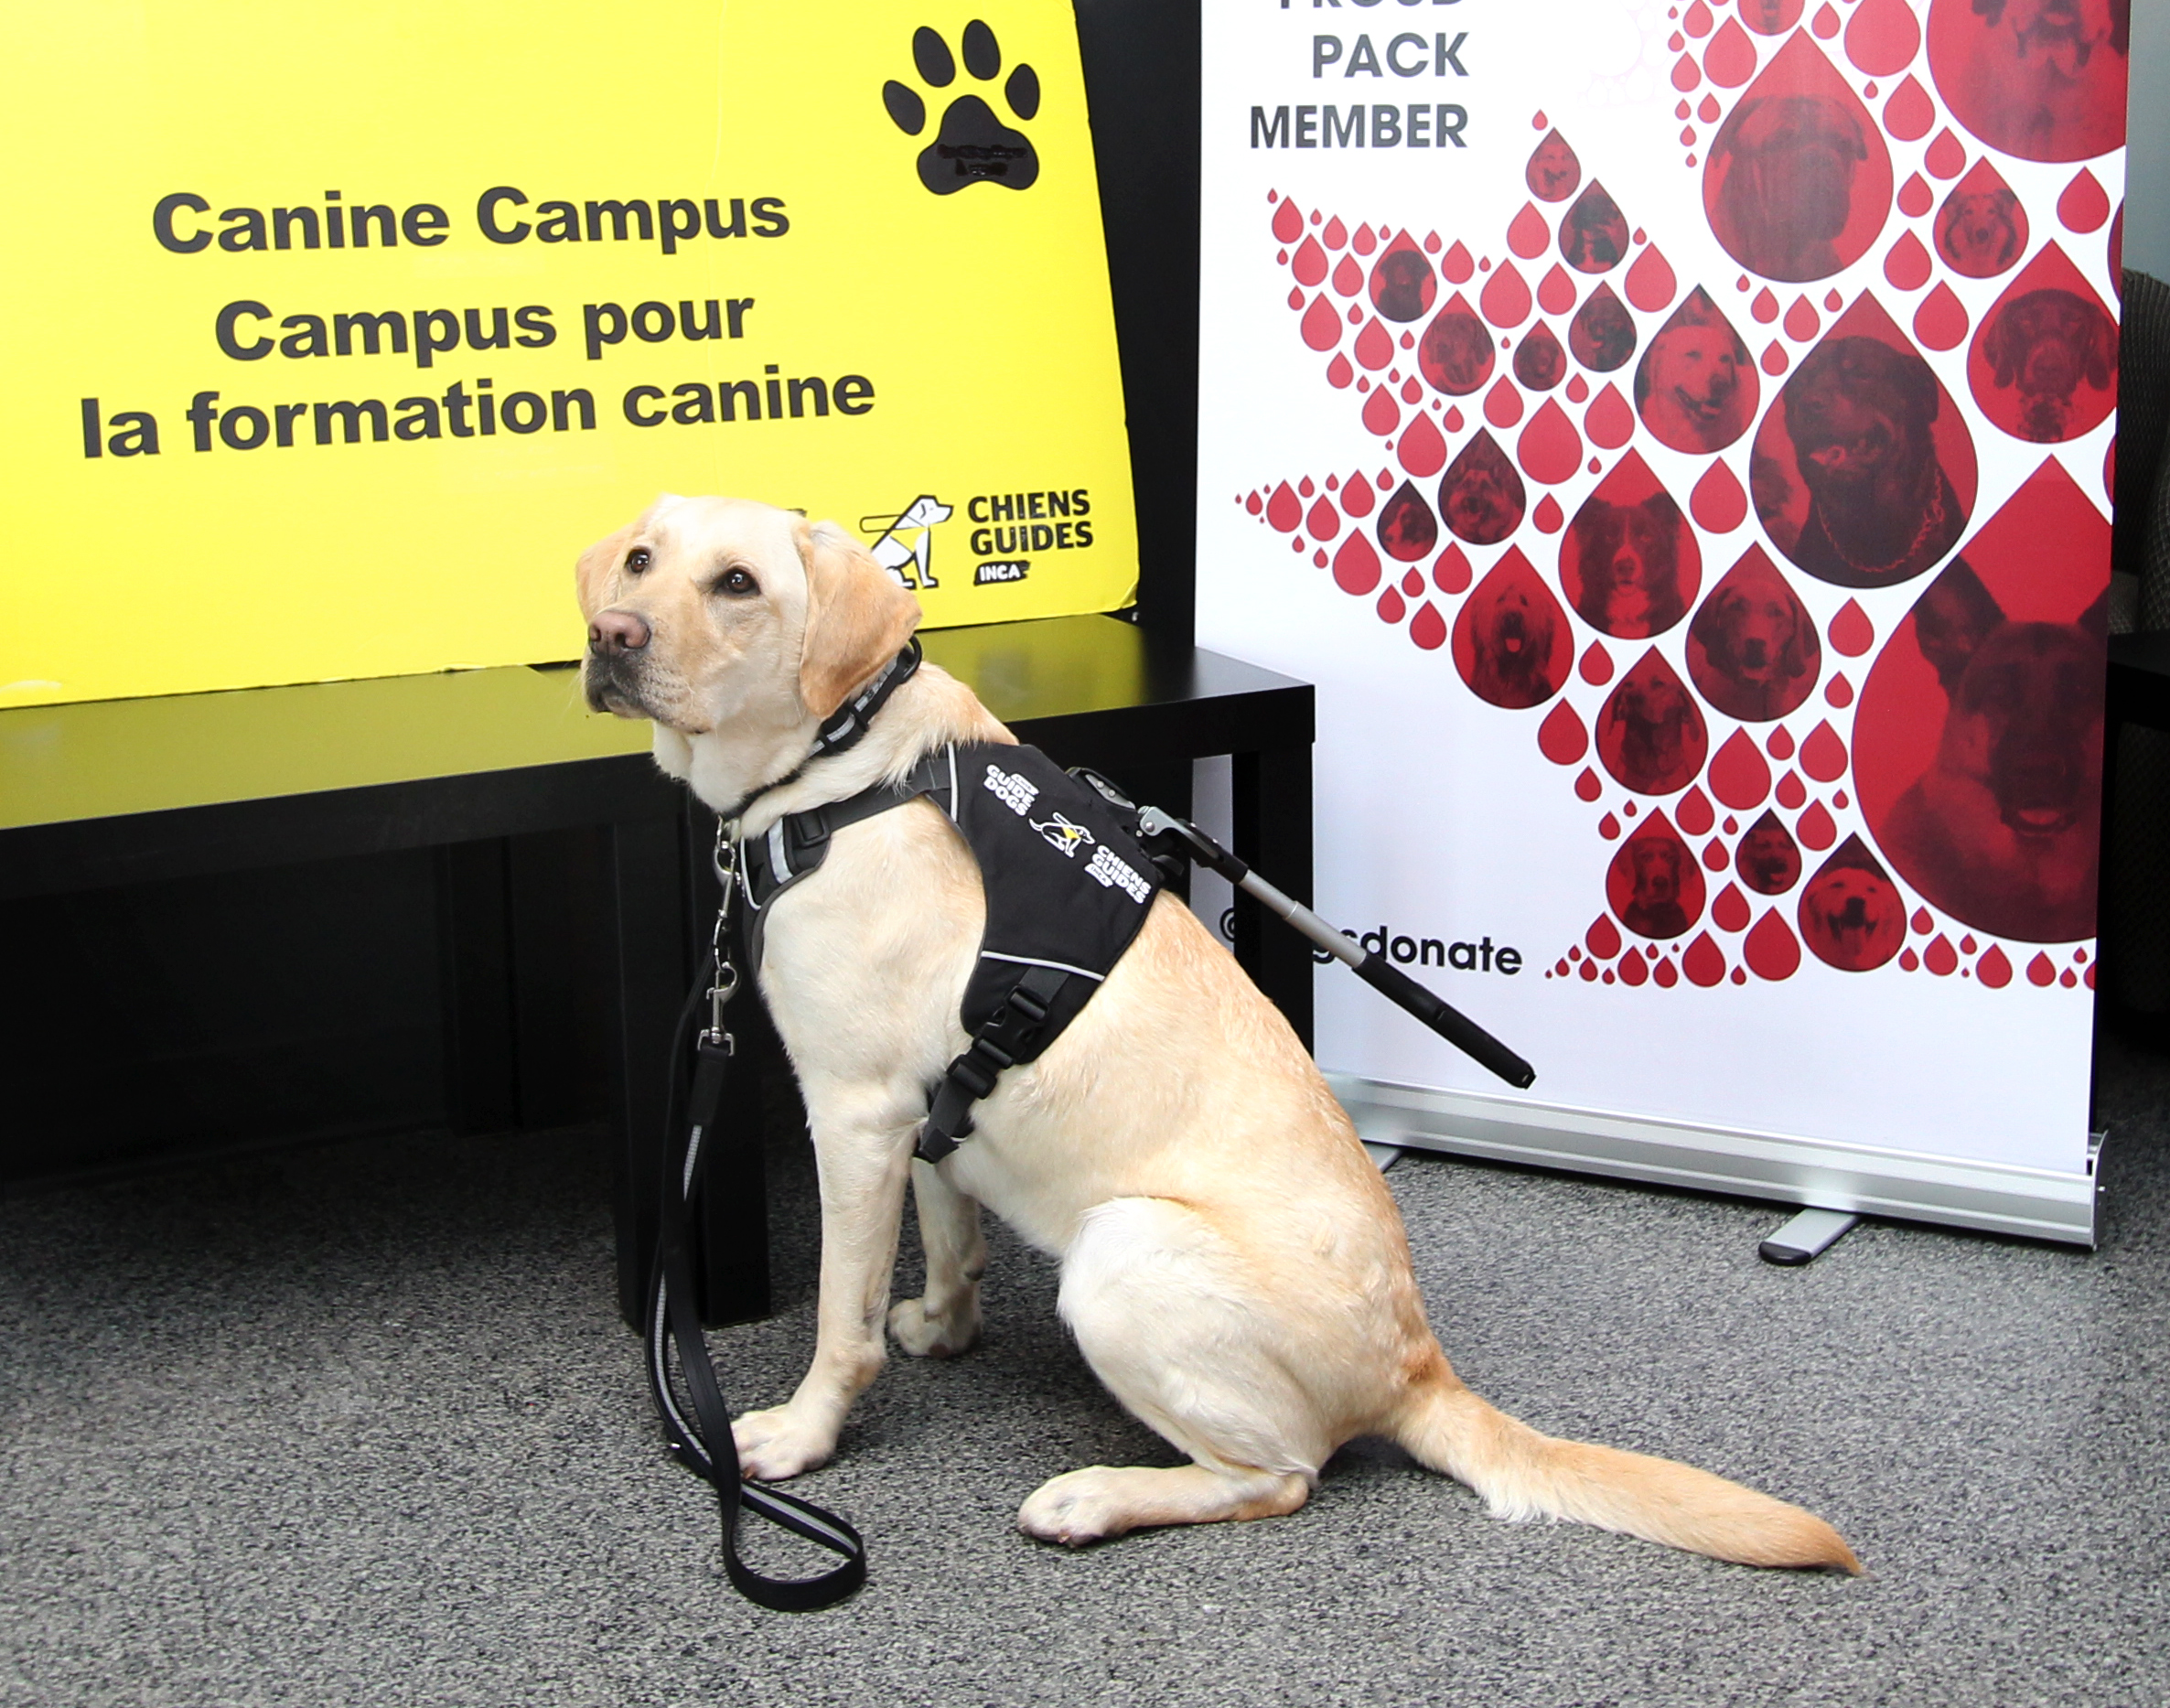 A yellow Labrador retriever wearing a guiding harness and leash, sitting on the floor in front of two signs that read, “Canine Campus” and “Canadian Animal Blood Bank ‘Proud Pack Member’”.